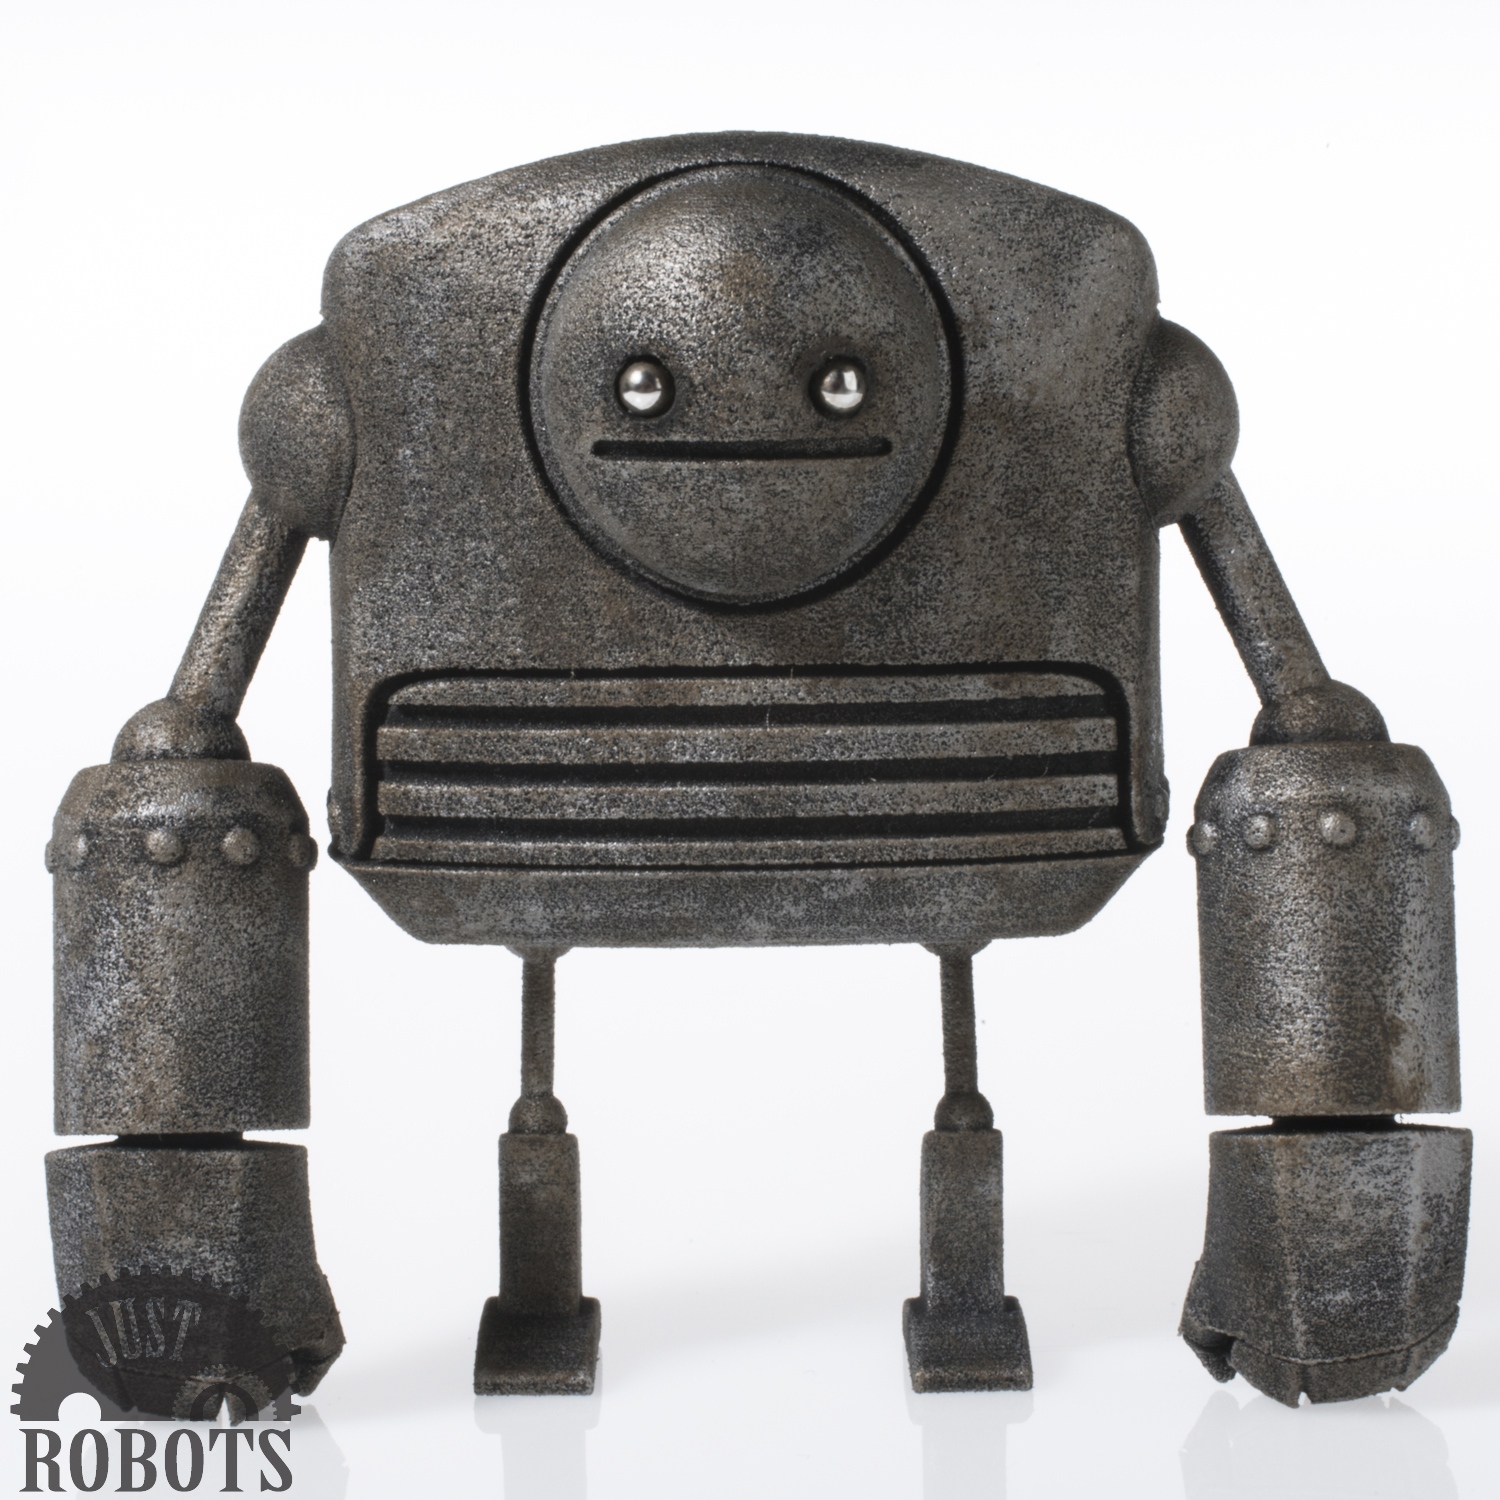 strongbot